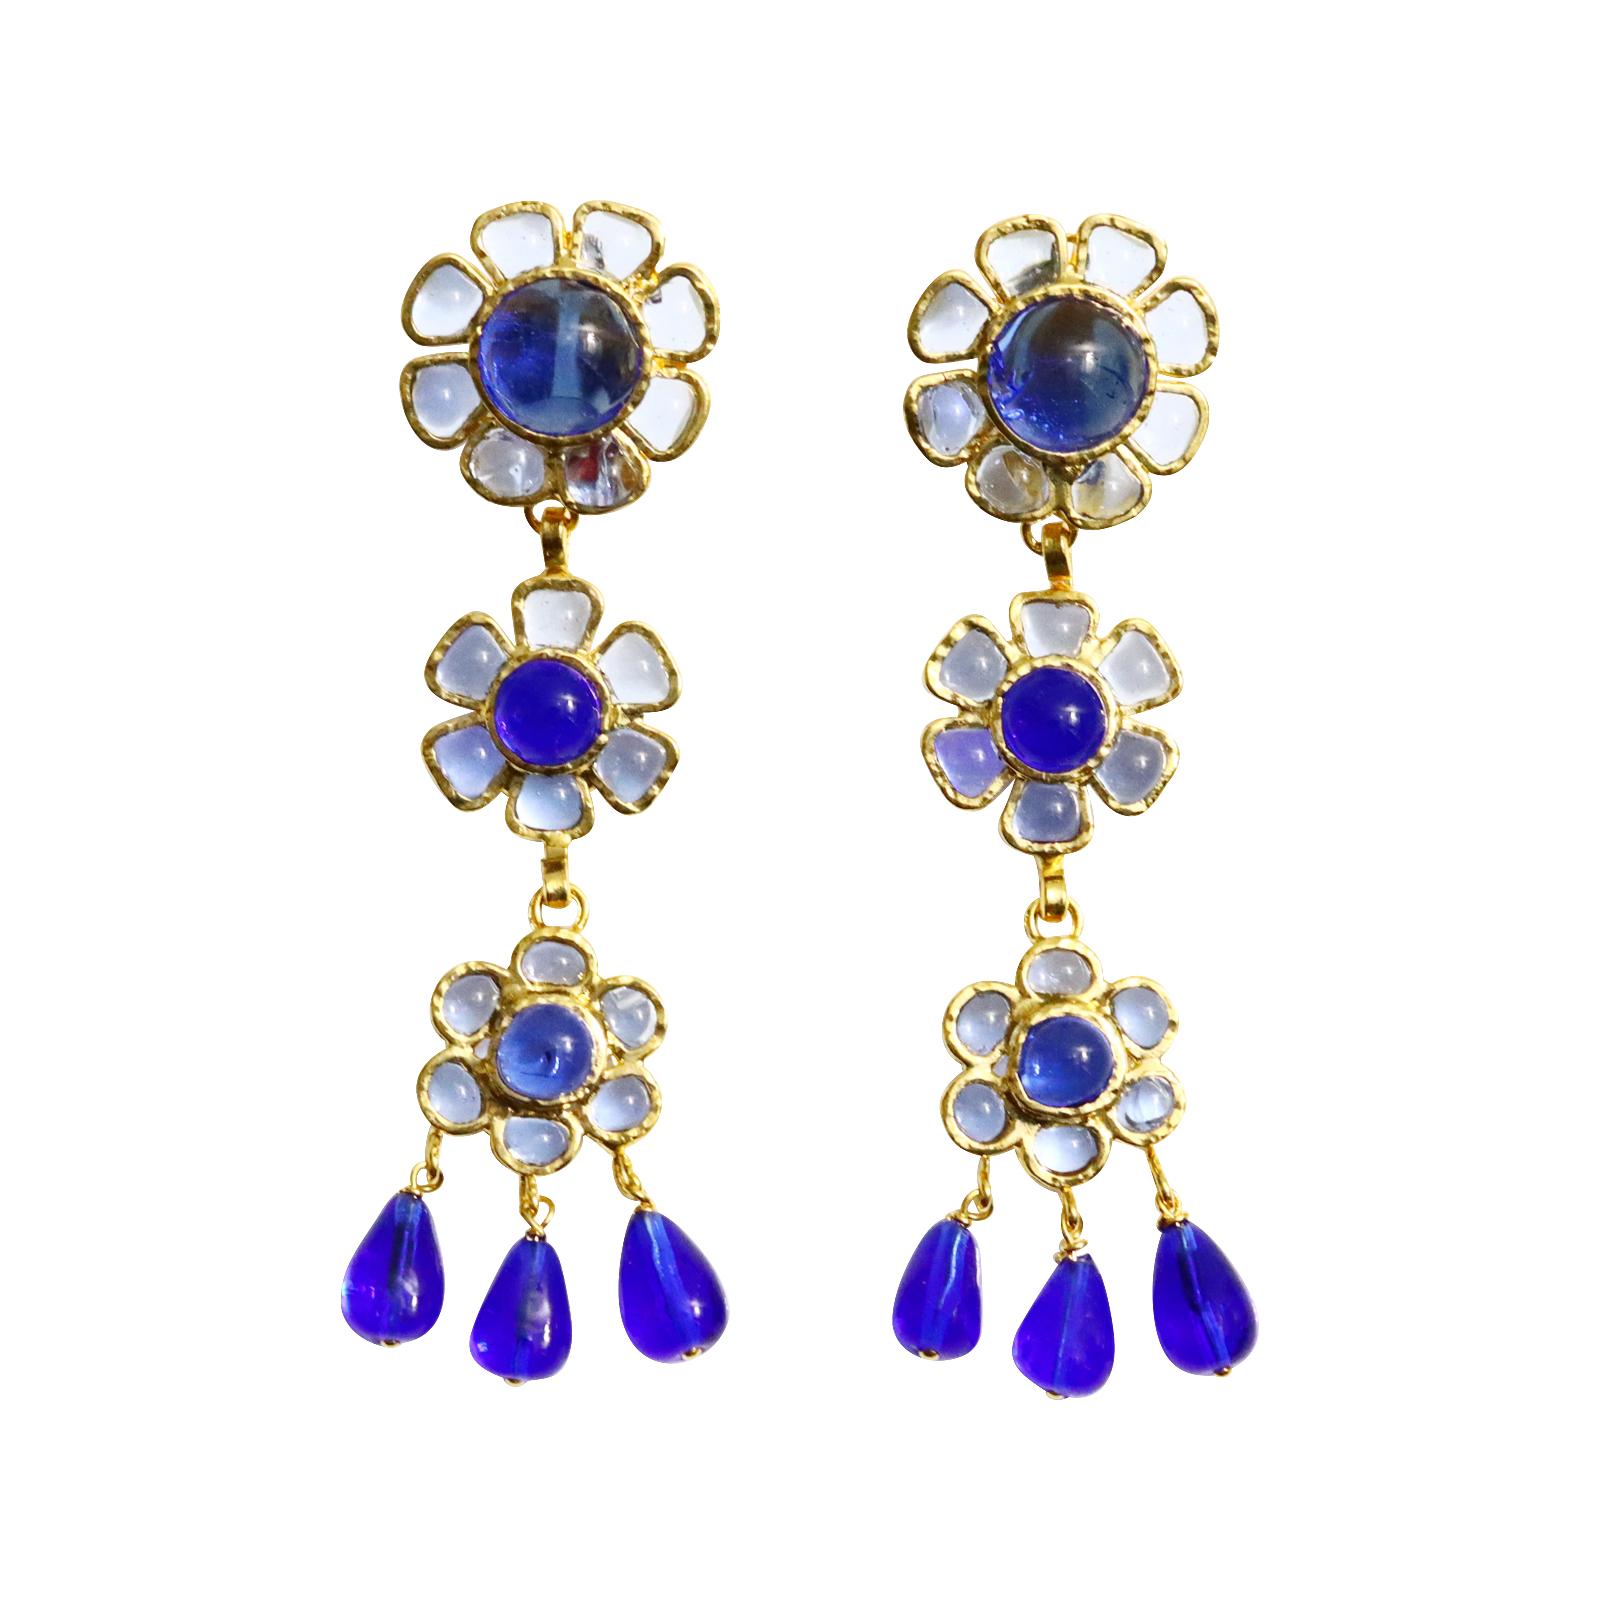 Maison Gripoix Vintage Blue and Light Blue Flower Dangling Earrings Circa 1980s In Good Condition For Sale In New York, NY